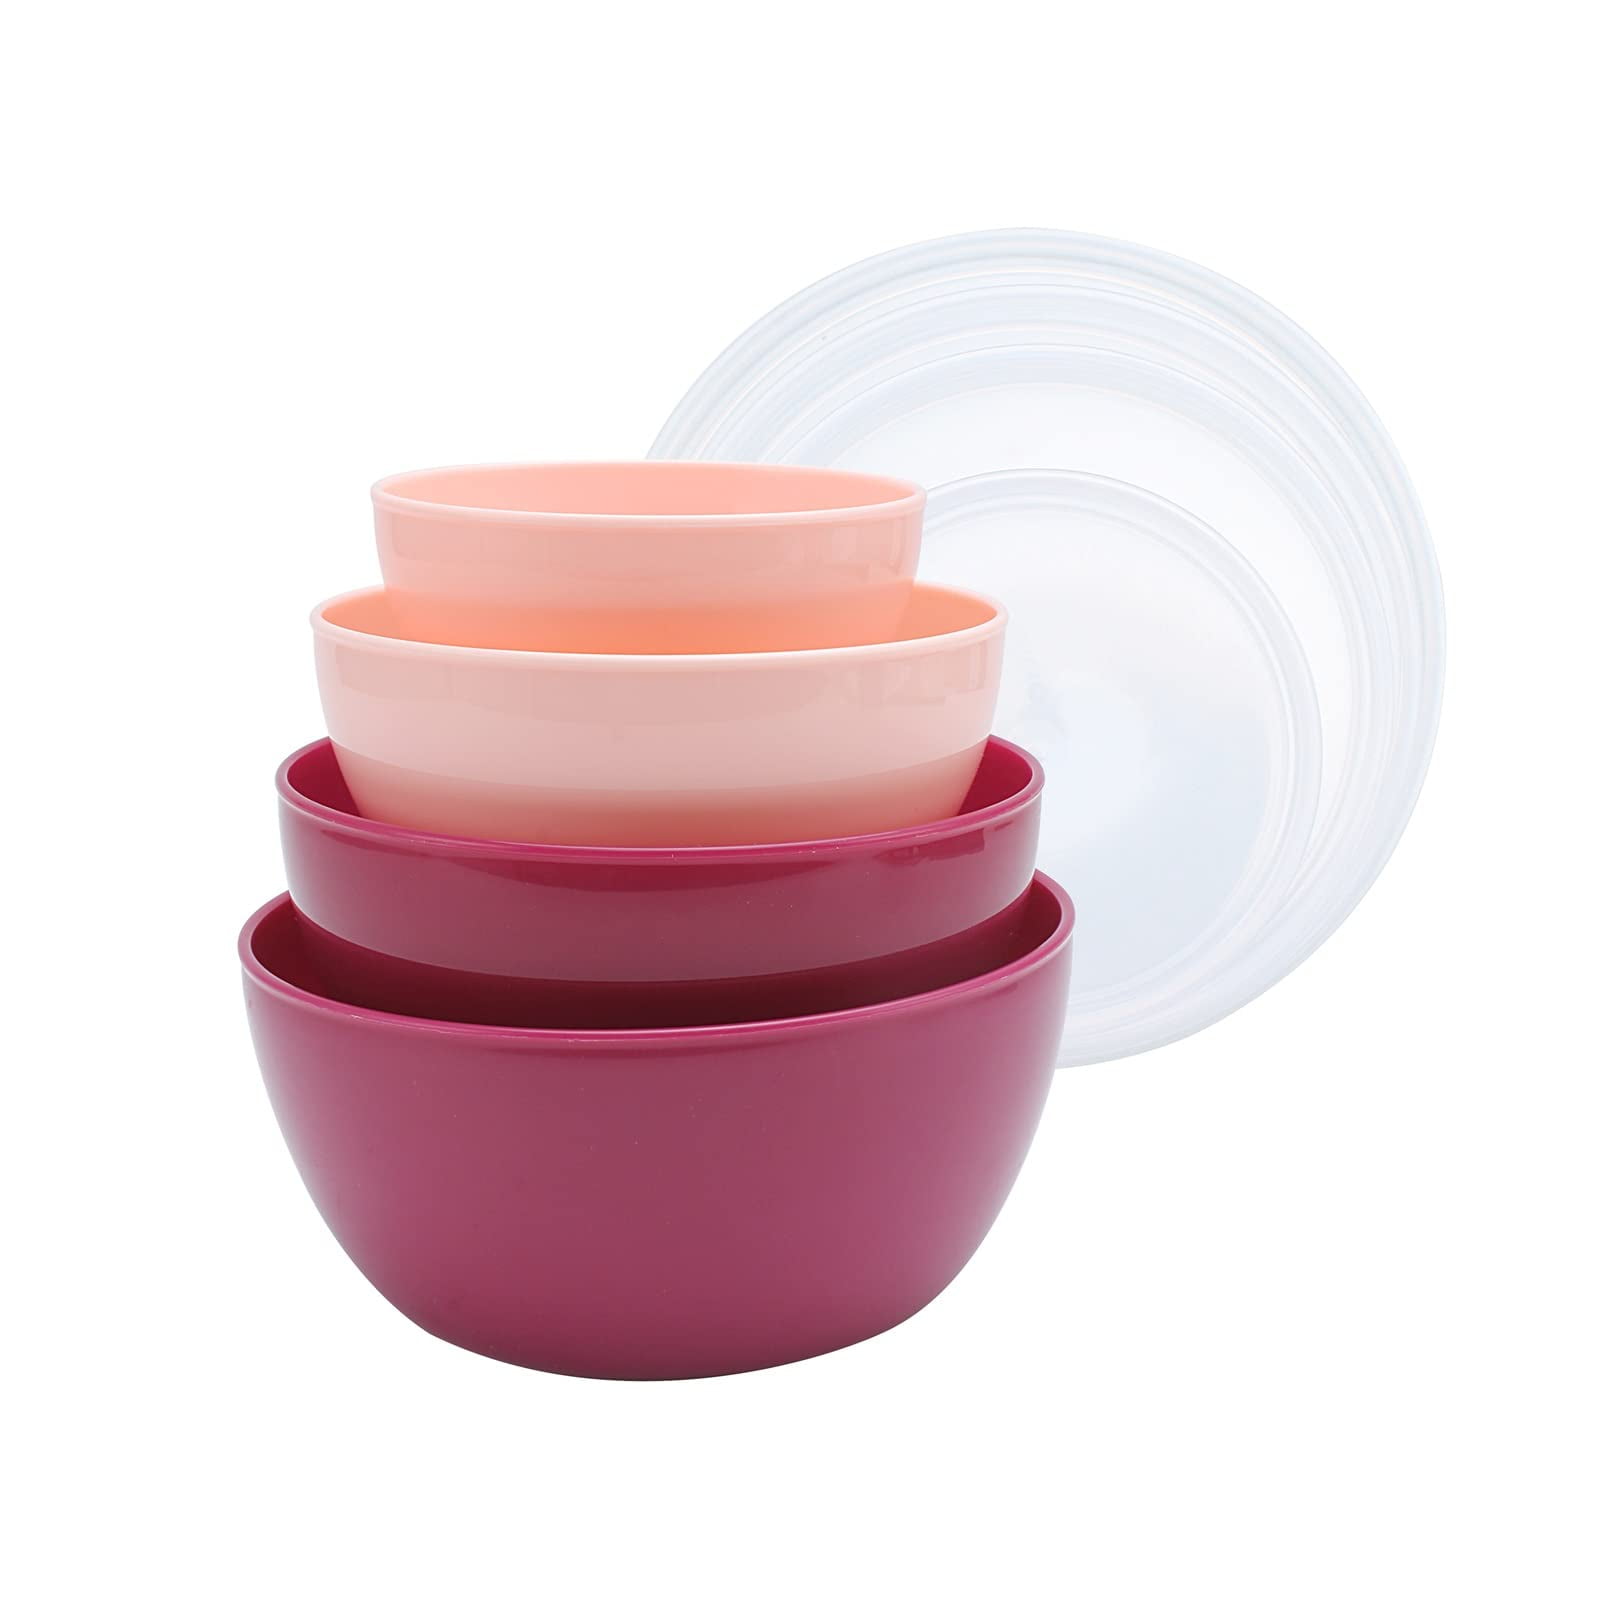 Cook With Color cook with color prep bowls - wide mixing bowls nesting  plastic meal prep bowl set with lids - small bowls food containers in